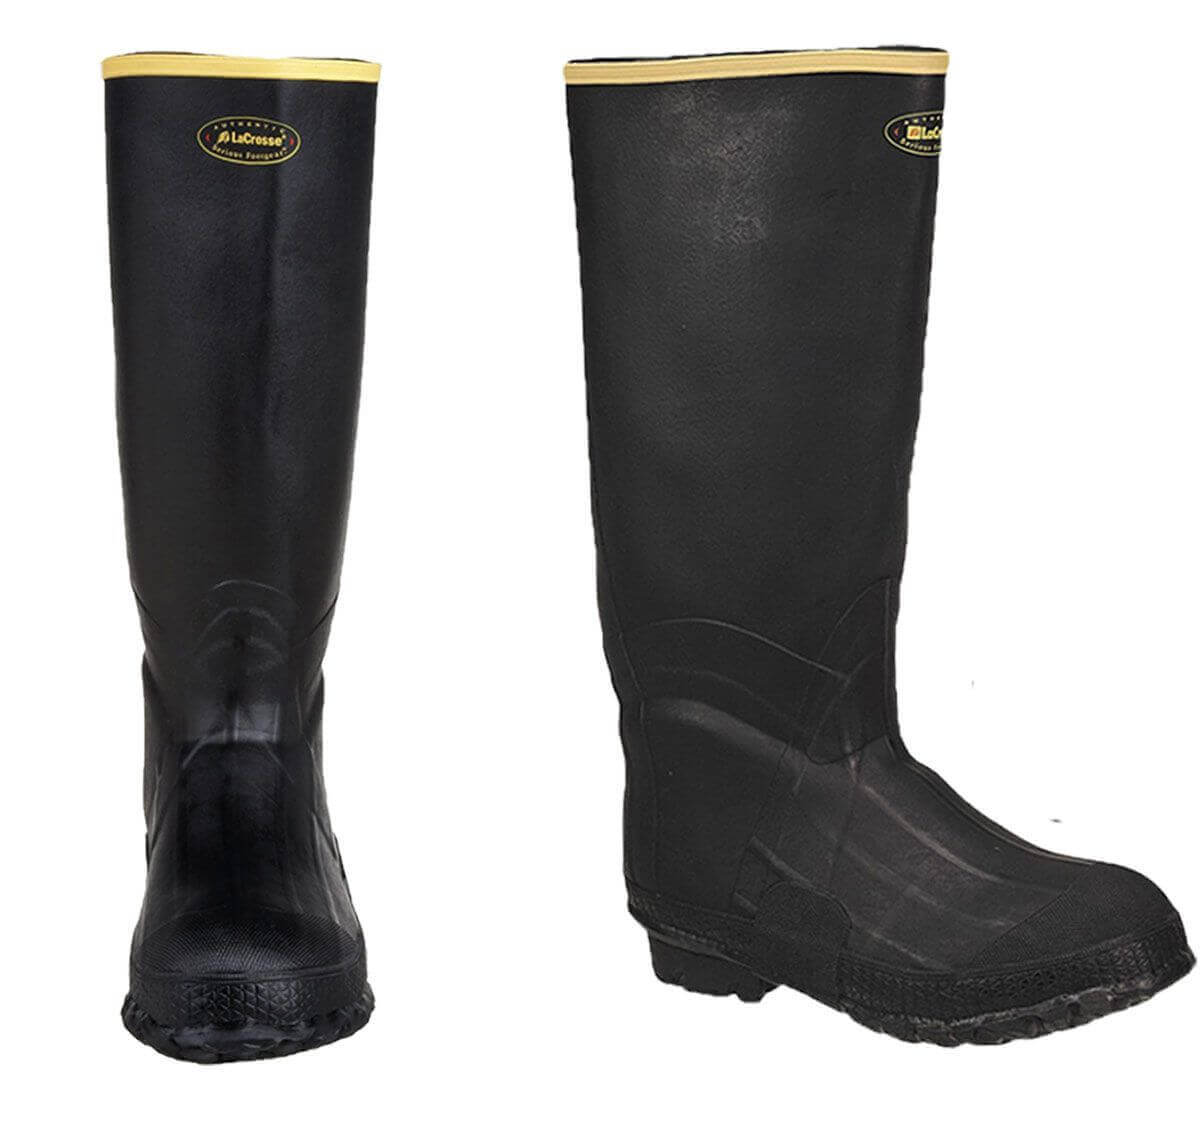 BRUSH BUSTER FROGLEGS CORDURA WITH NON-INSULATED LACROSSE KNEE BOOT